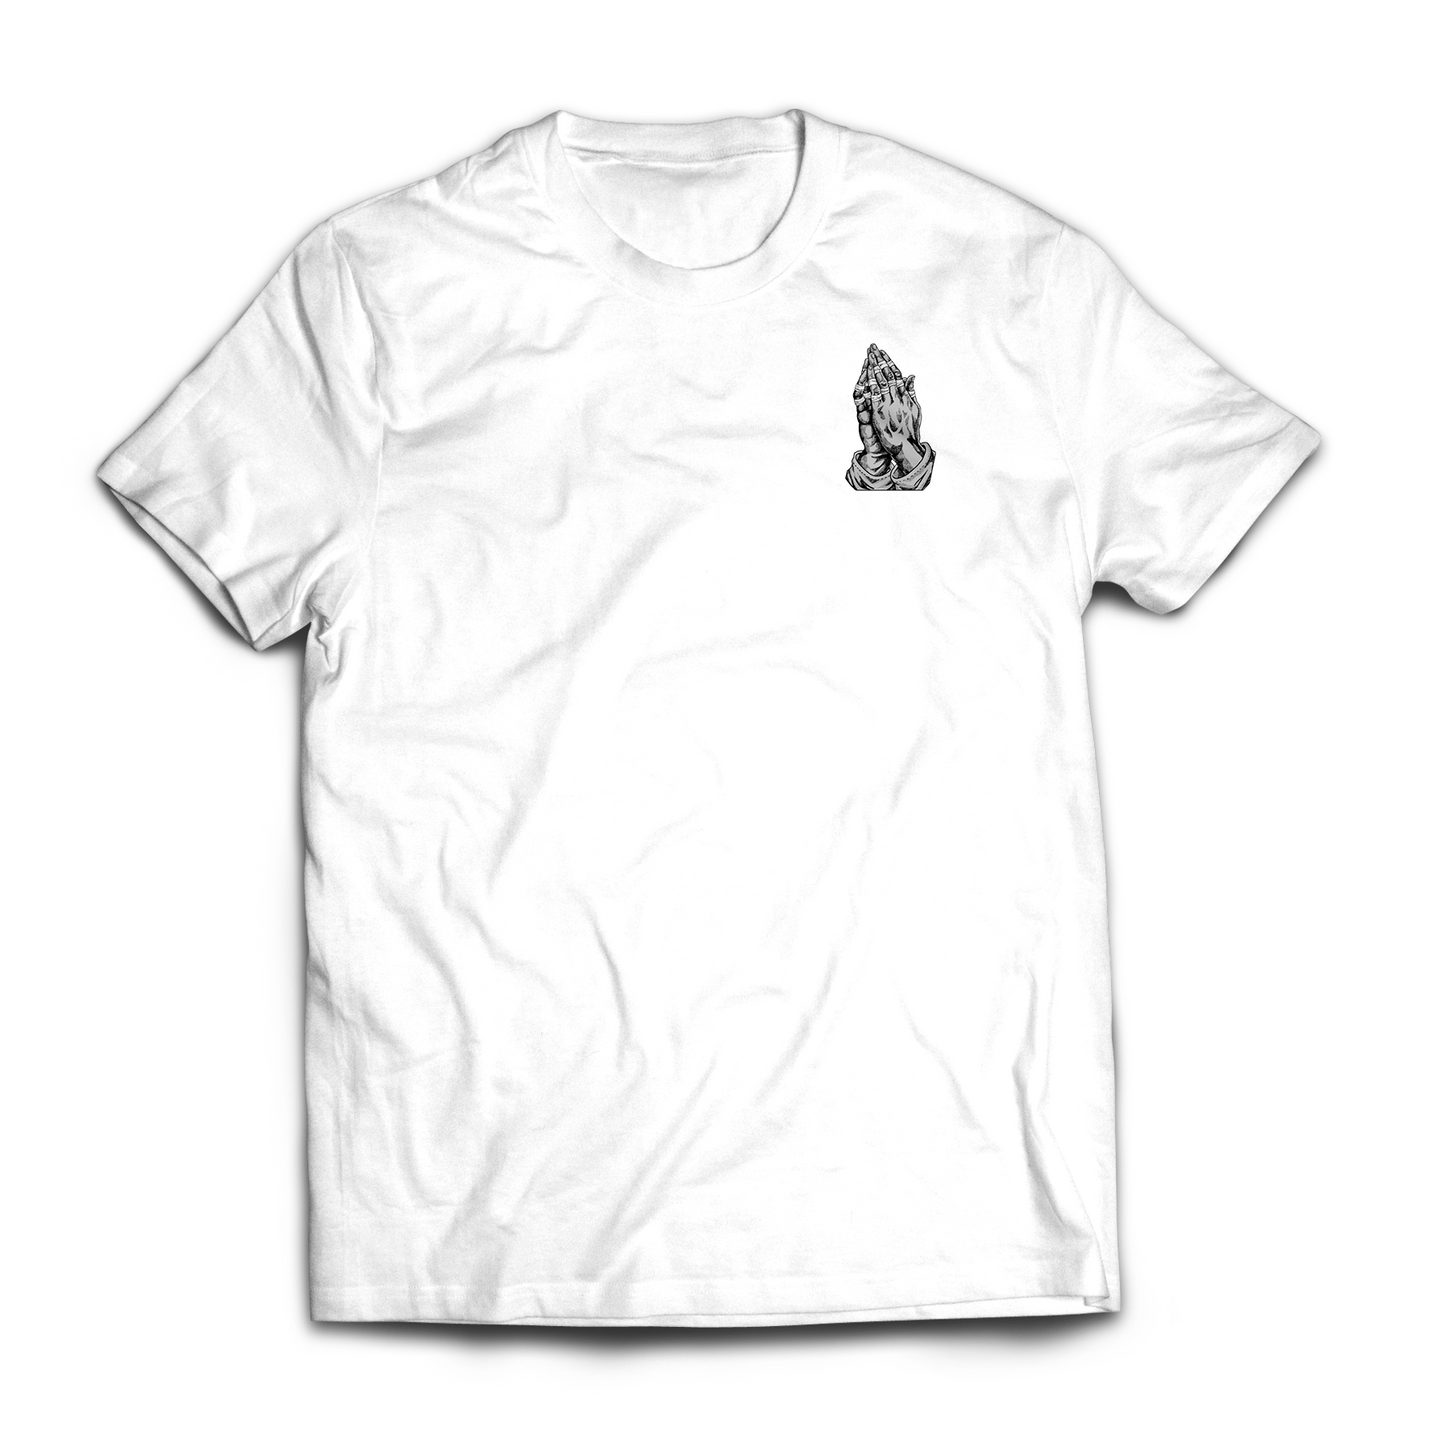 Taped Hands T-Shirt - White Club Combat Tested –